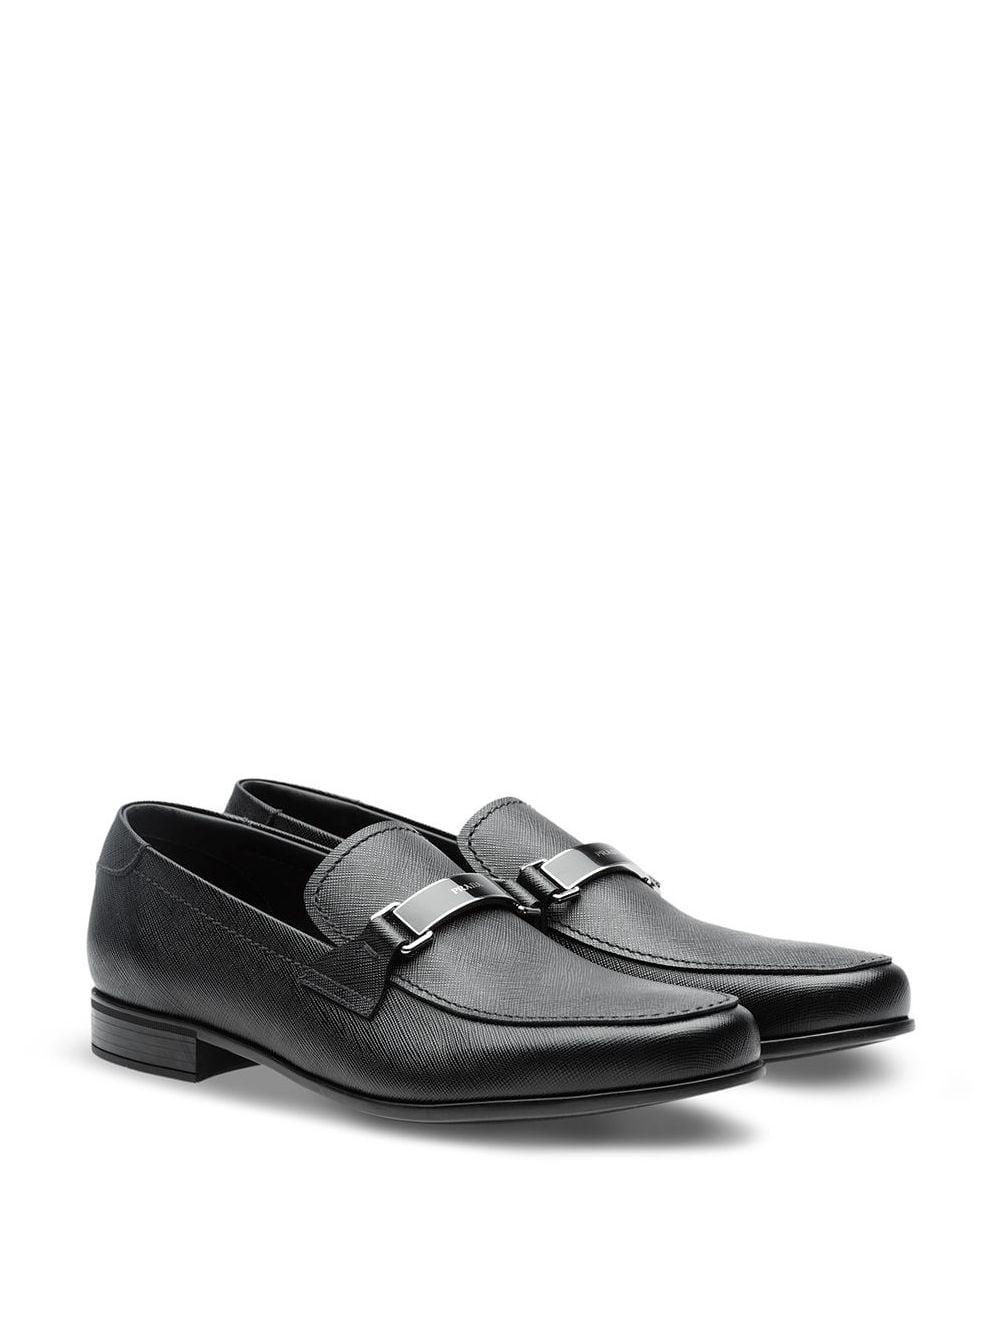 Prada Saffiano Leather Loafers in Black for Men - Lyst